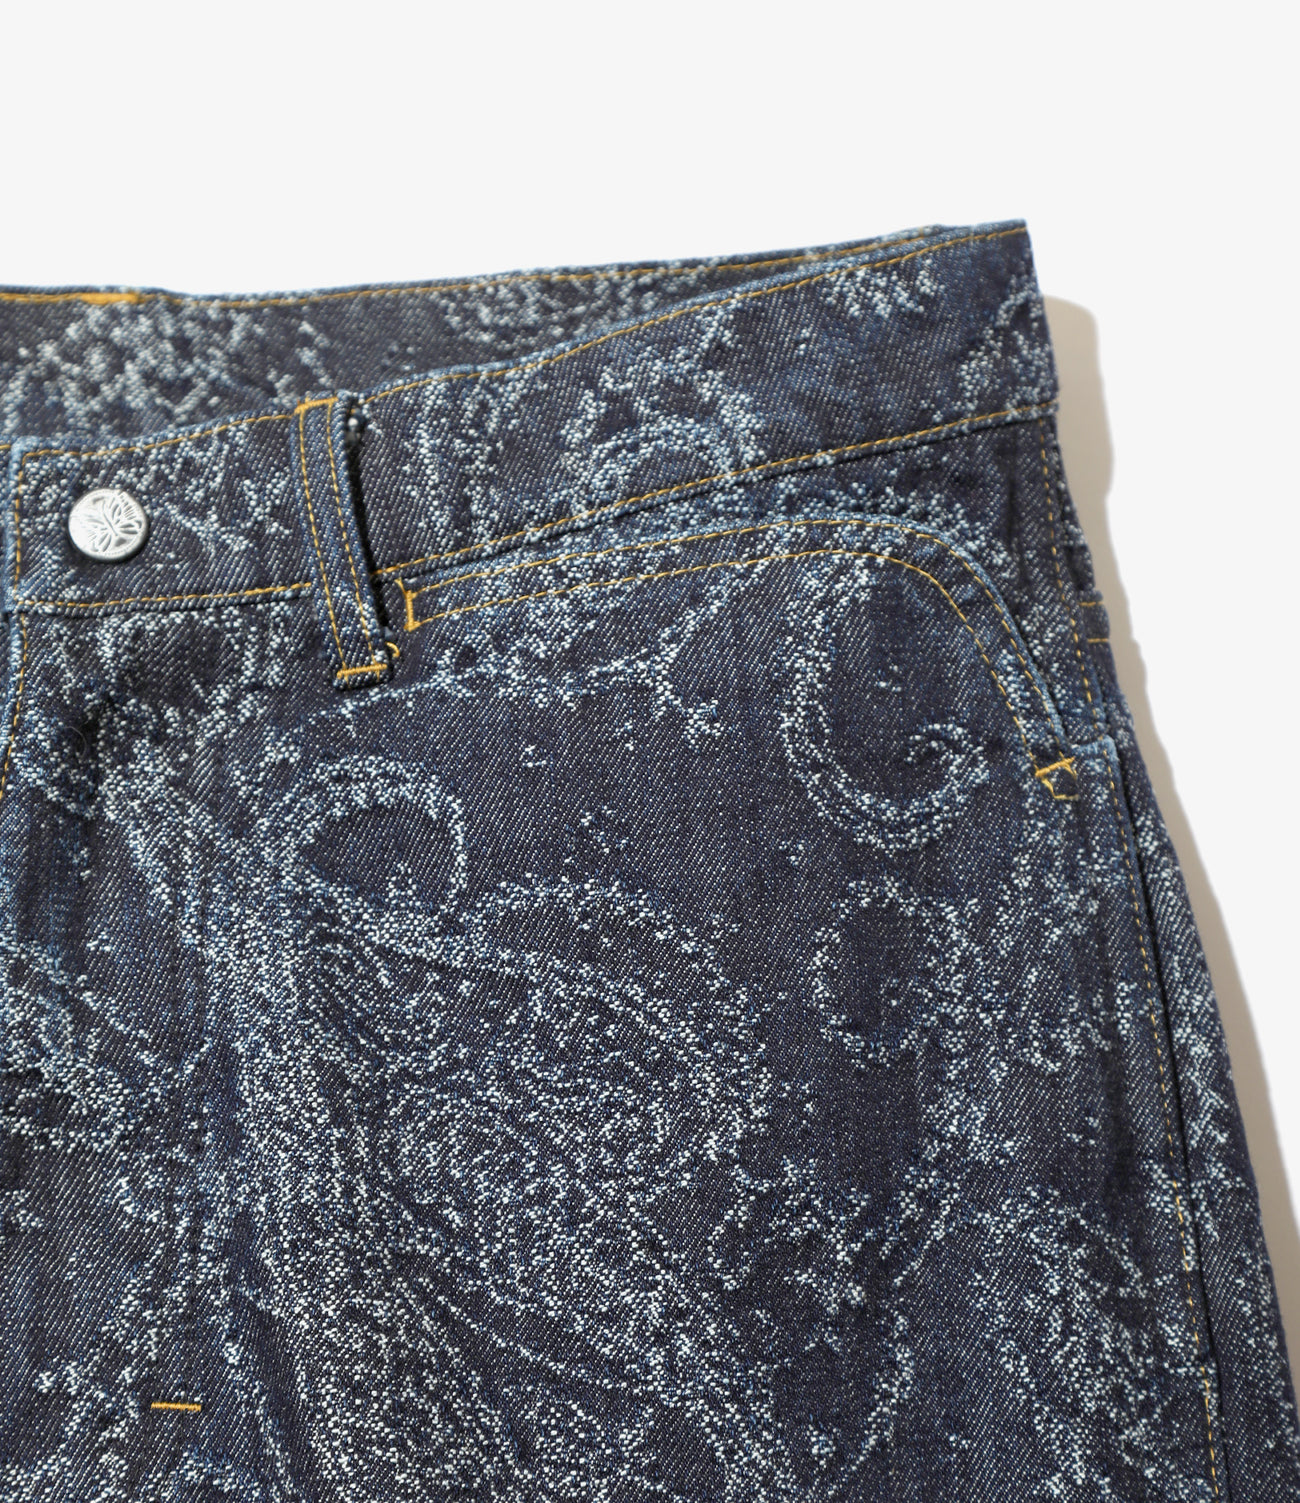 Boot-Cut Jean - 13oz Dnm/Paisley Jq. – NEPENTHES ONLINE STORE